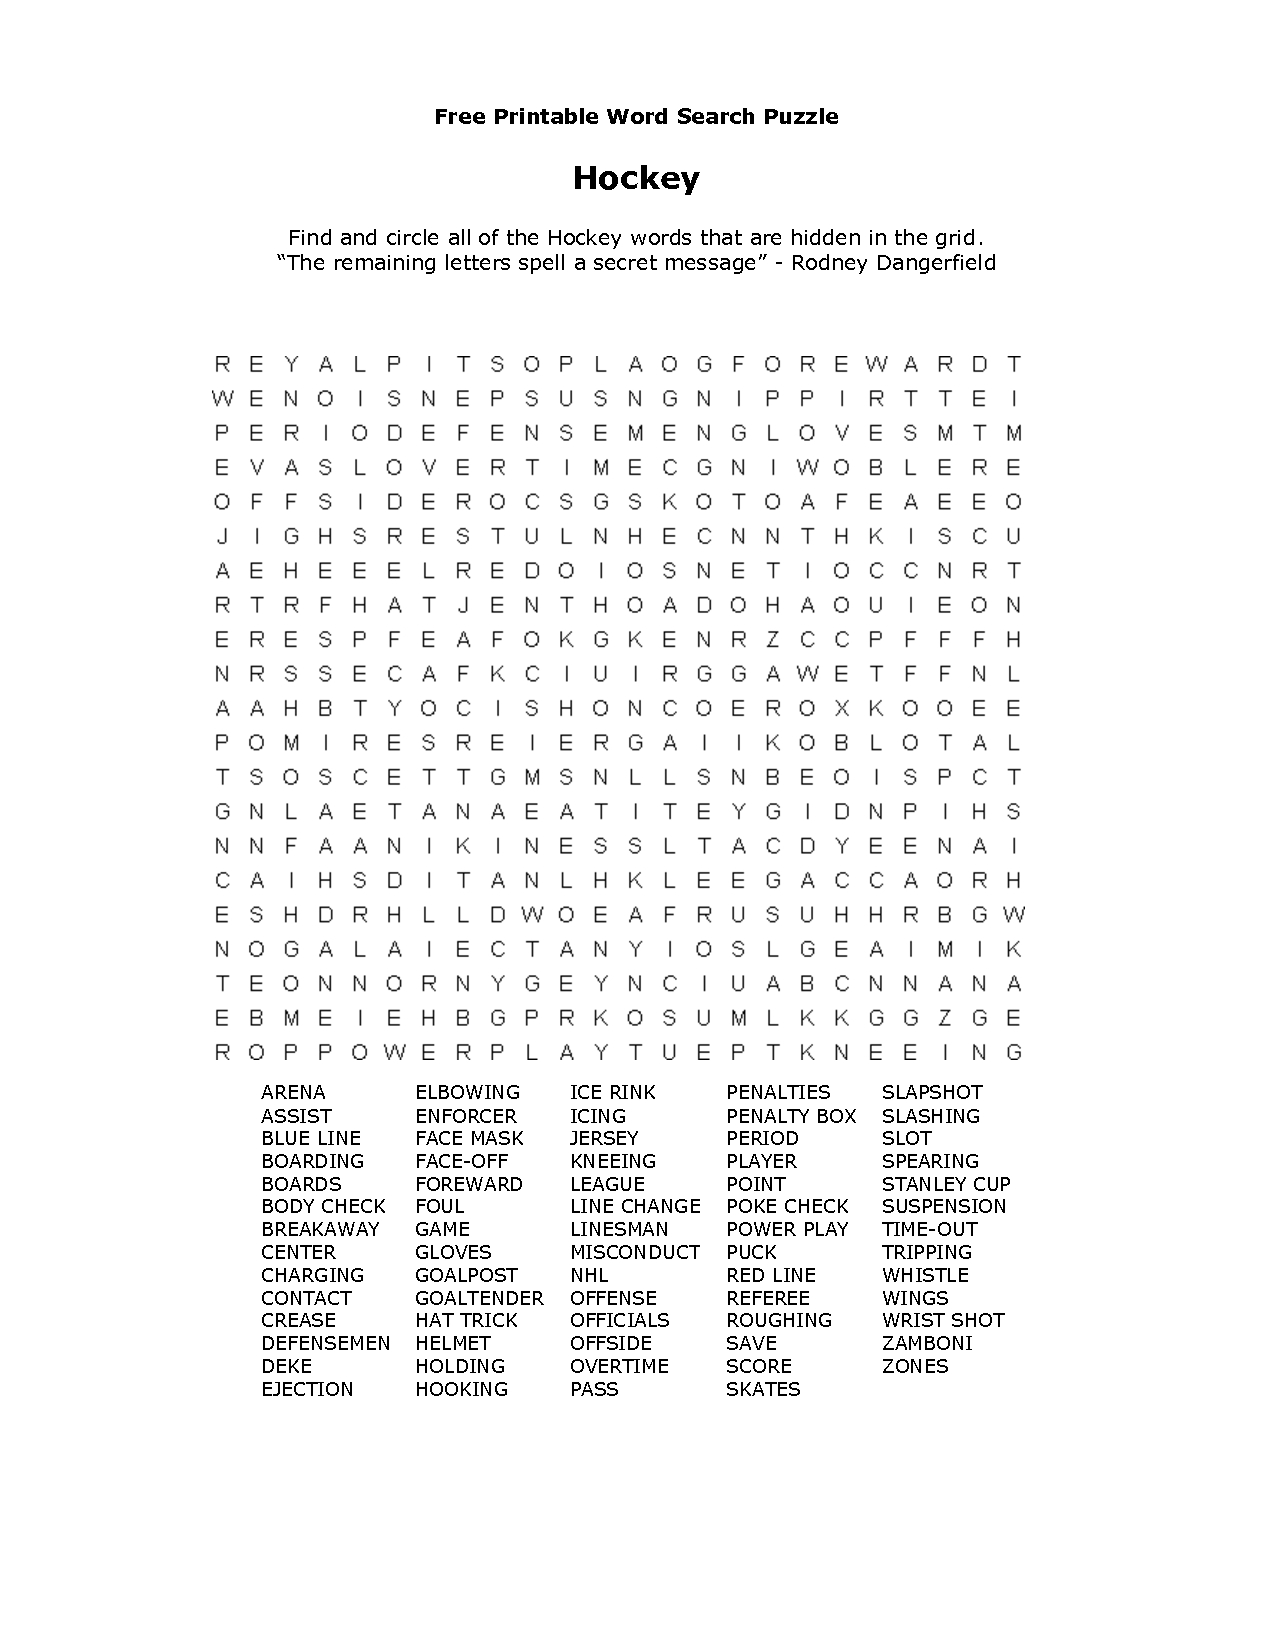 Free Printable Word Searches | طلال | Word Search Puzzles, Free - Free Printable Puzzles And Brain Teasers